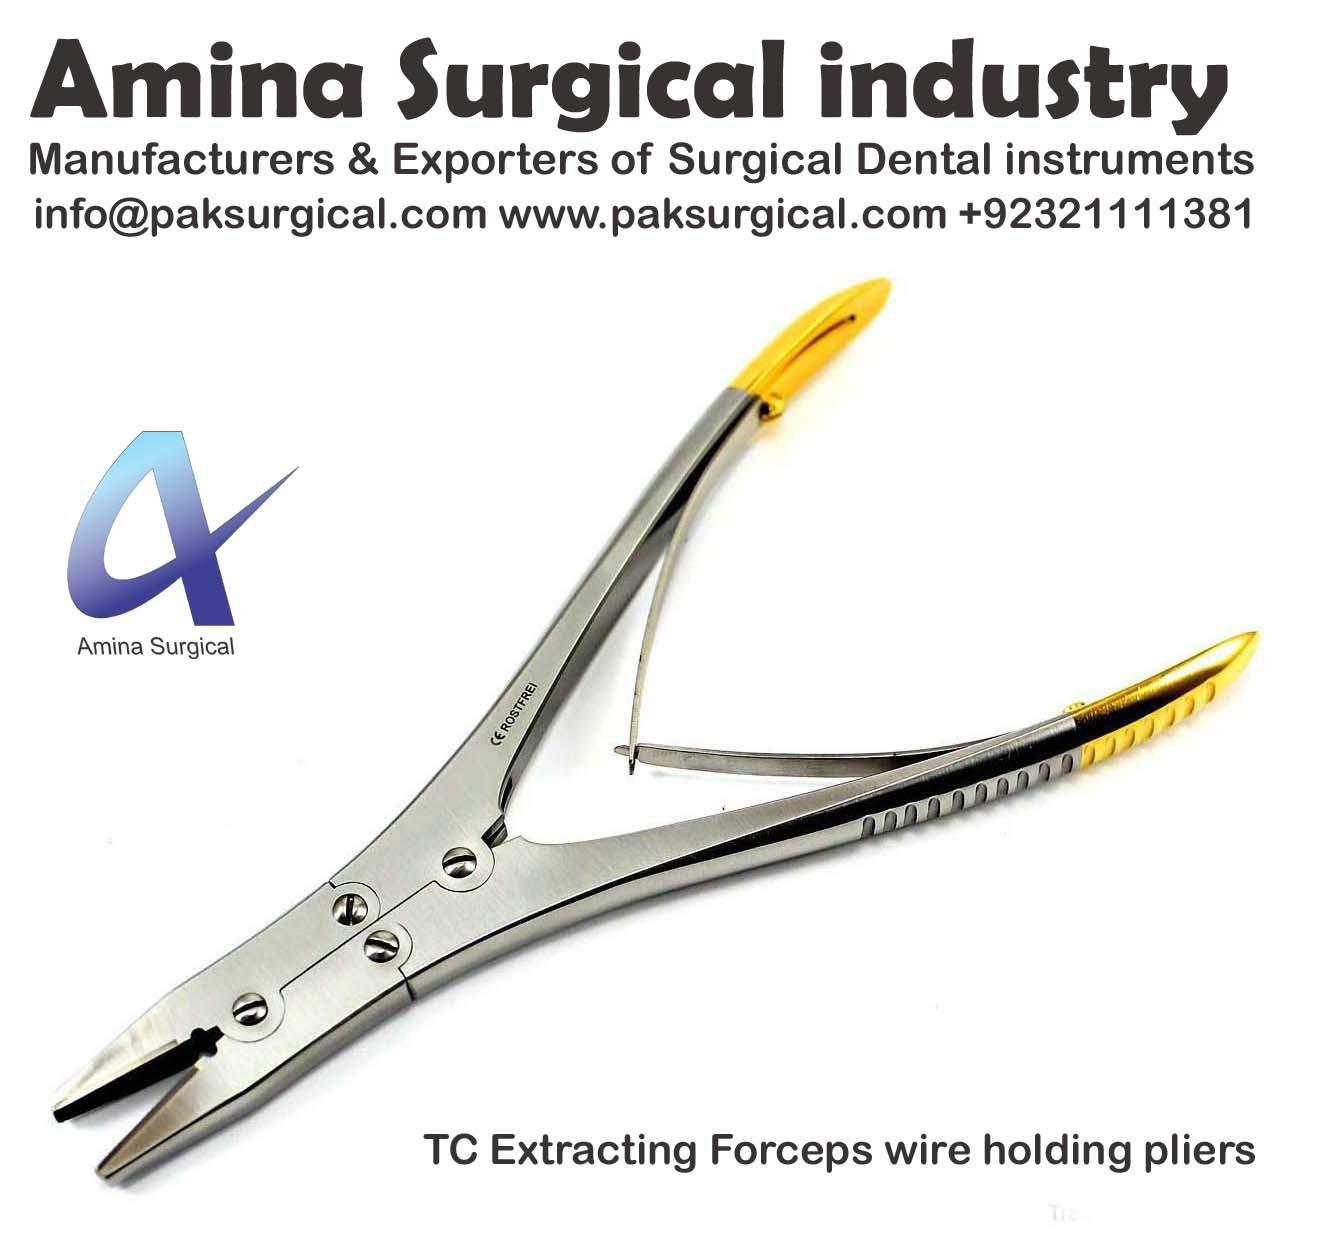 TC Extracting Forceps wire holding pliers action